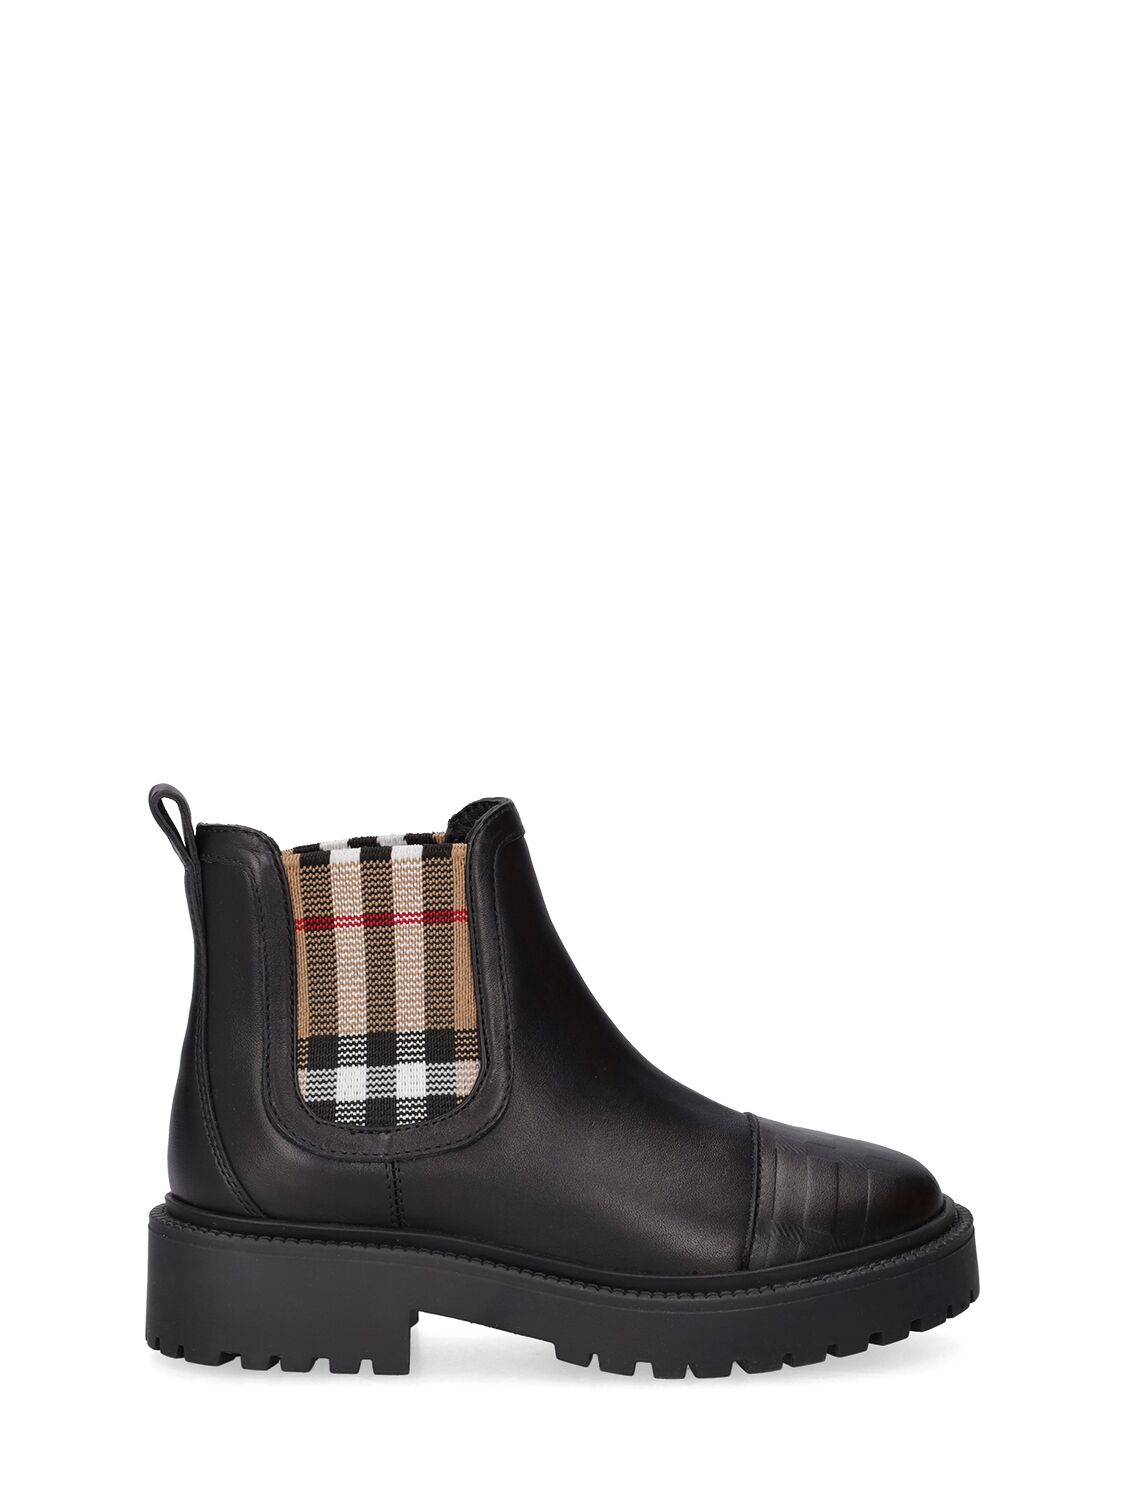 Image of Check Print Leather Chelsea Boots